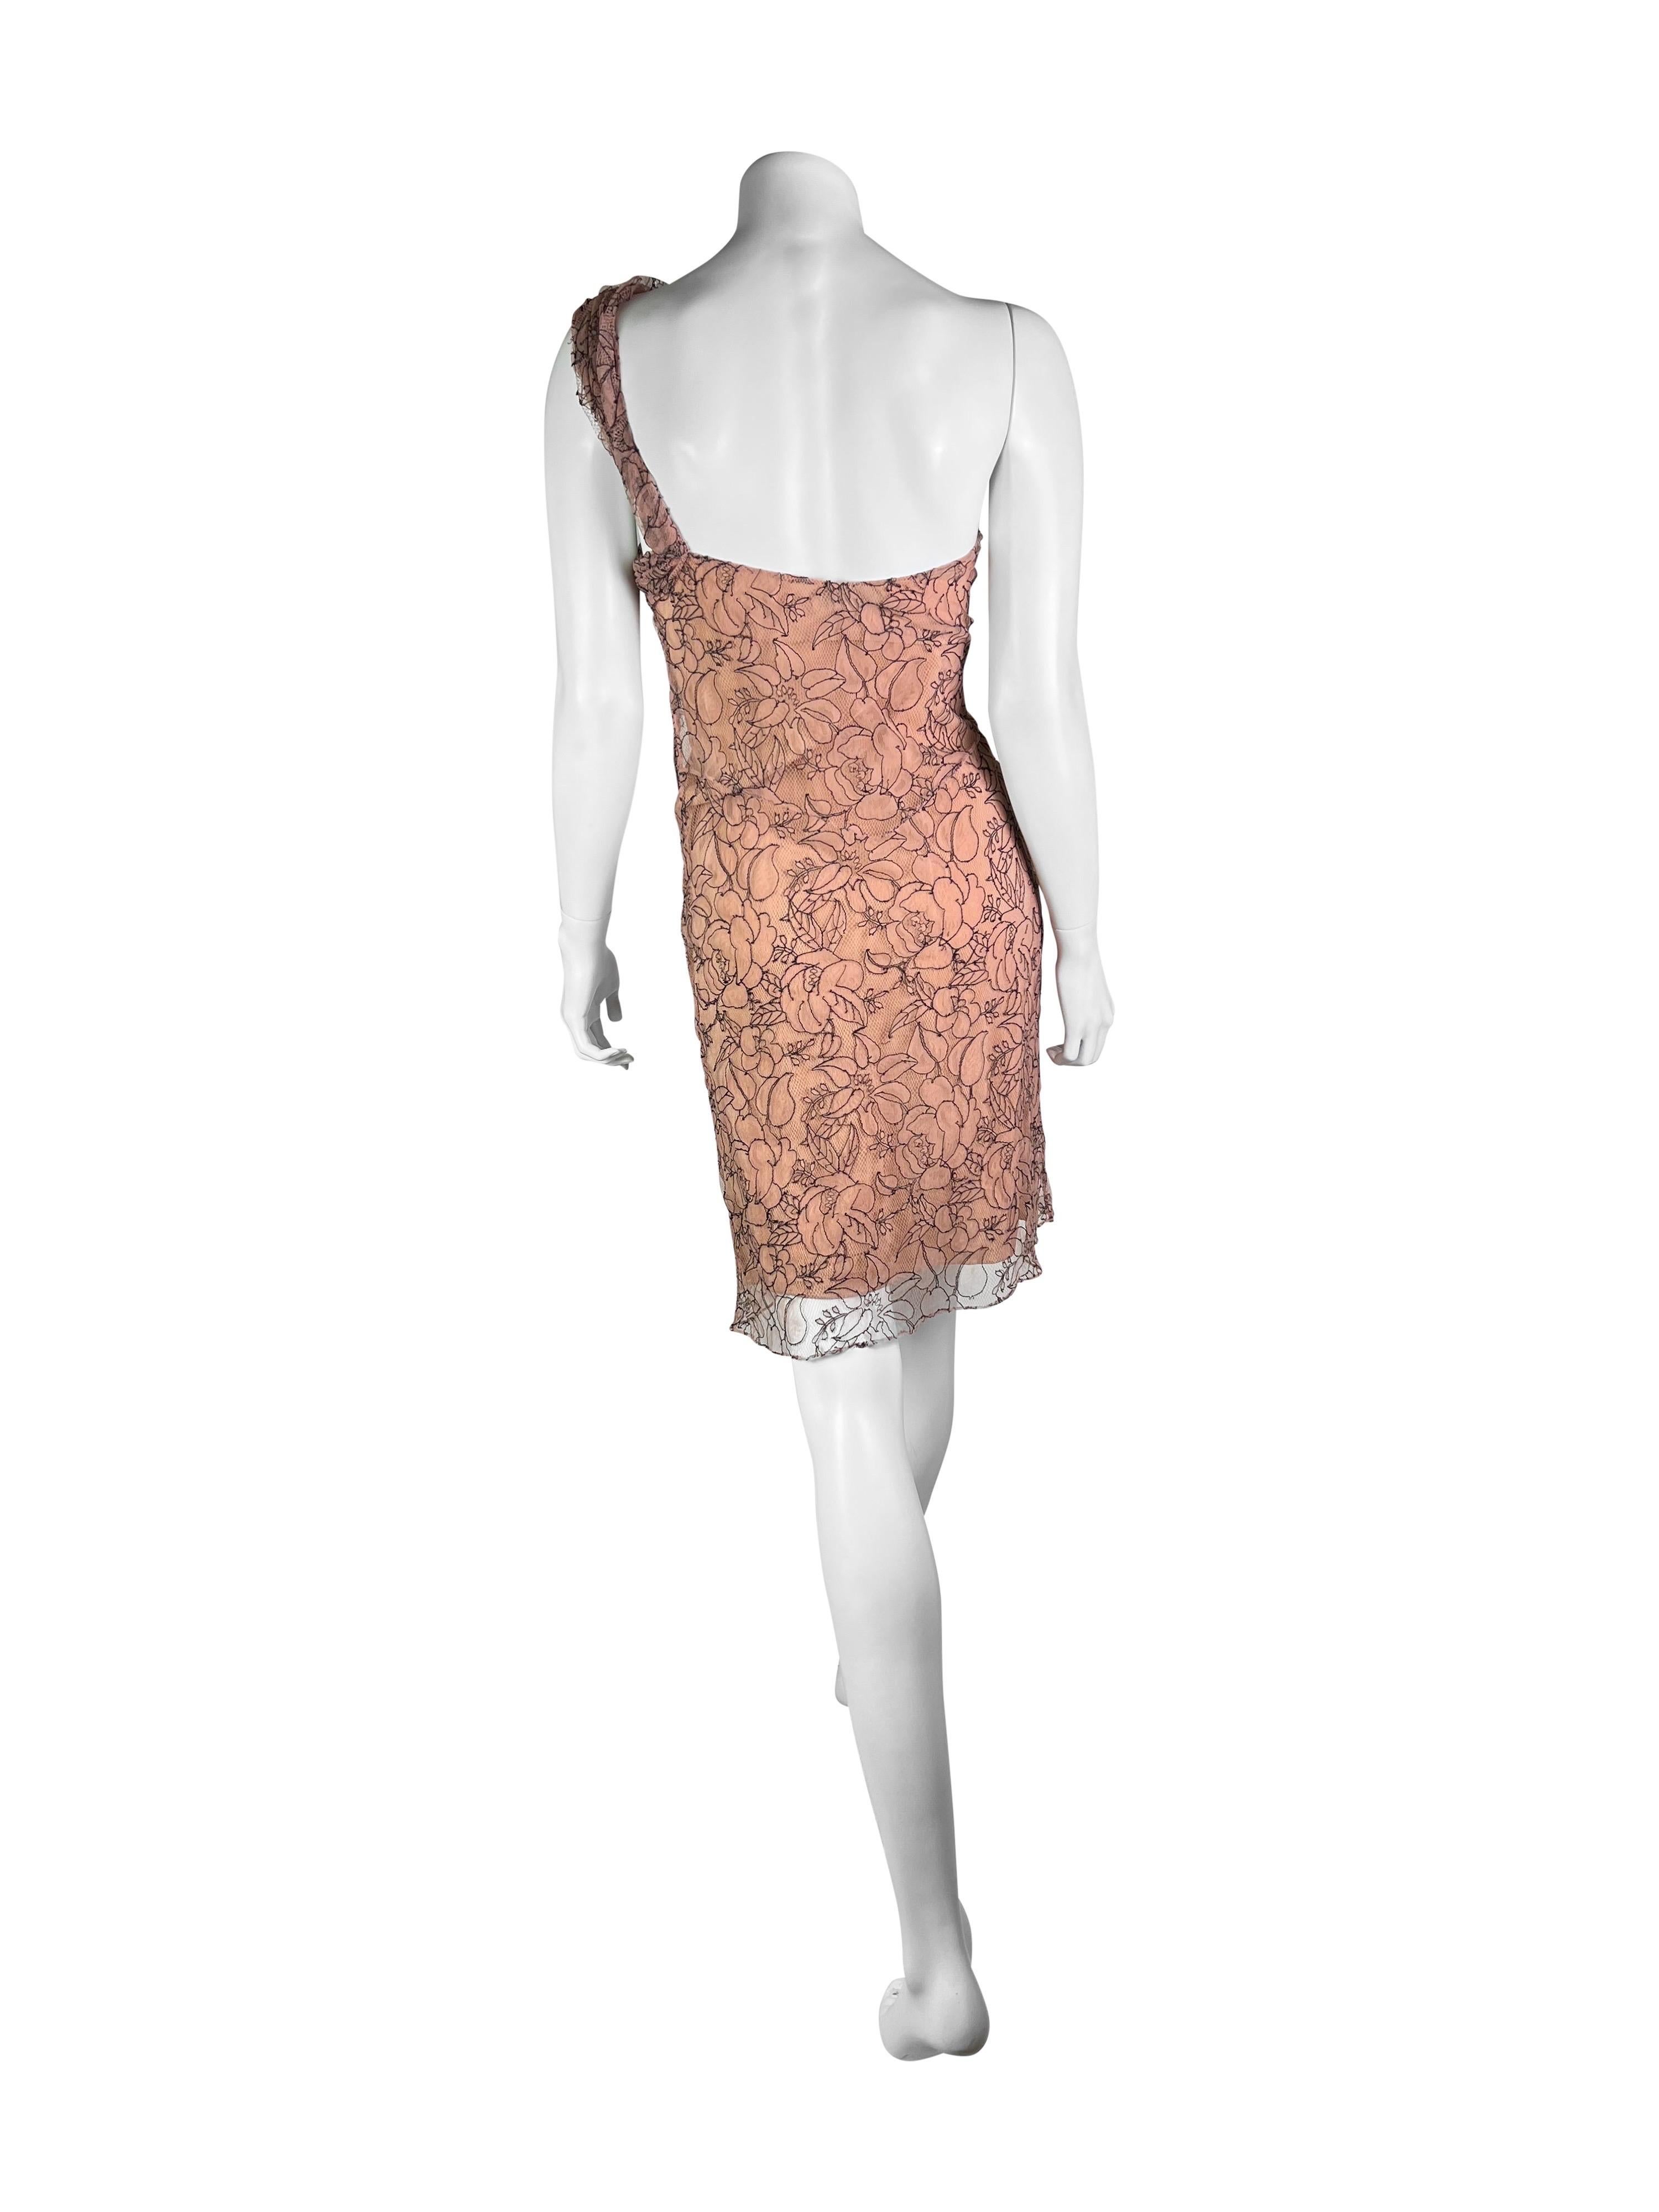  Spring 2006 Dior by John Galliano Lace Dress In Excellent Condition For Sale In Prague, CZ